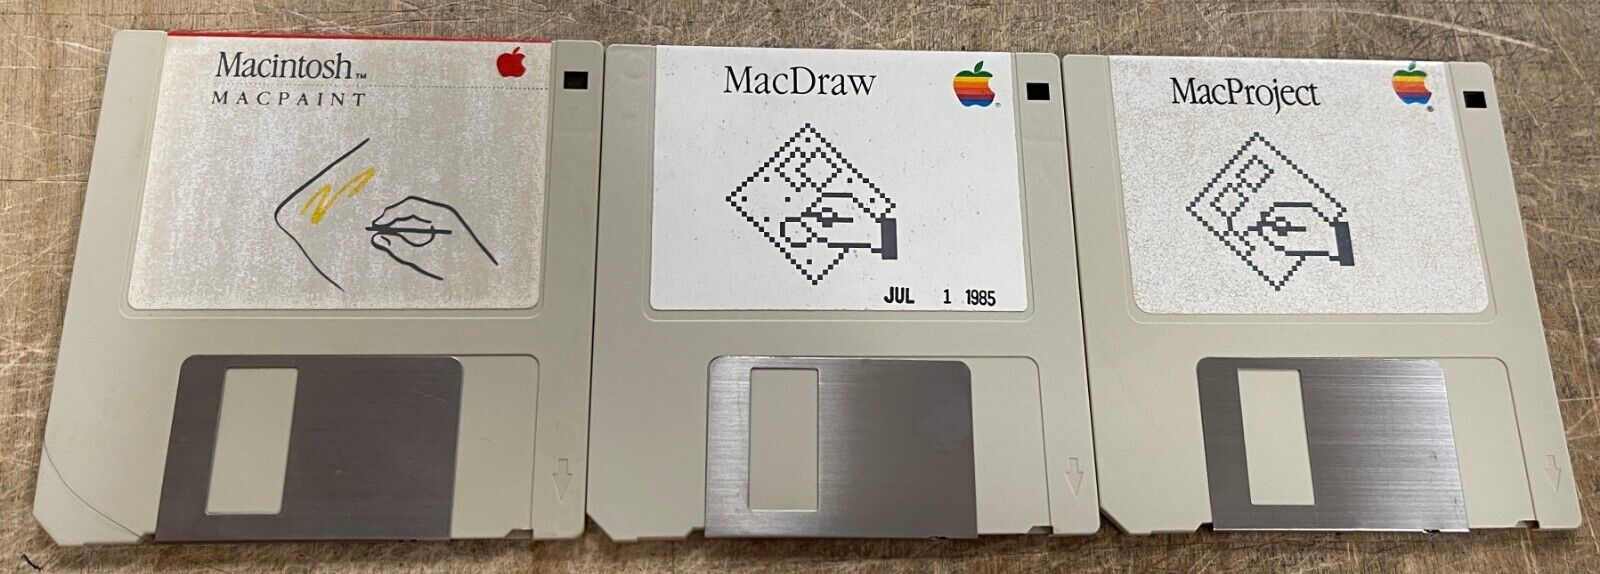 Apple Macintosh MacPaint, MacDraw and MacProject 400K Floppies TESTED WORKING